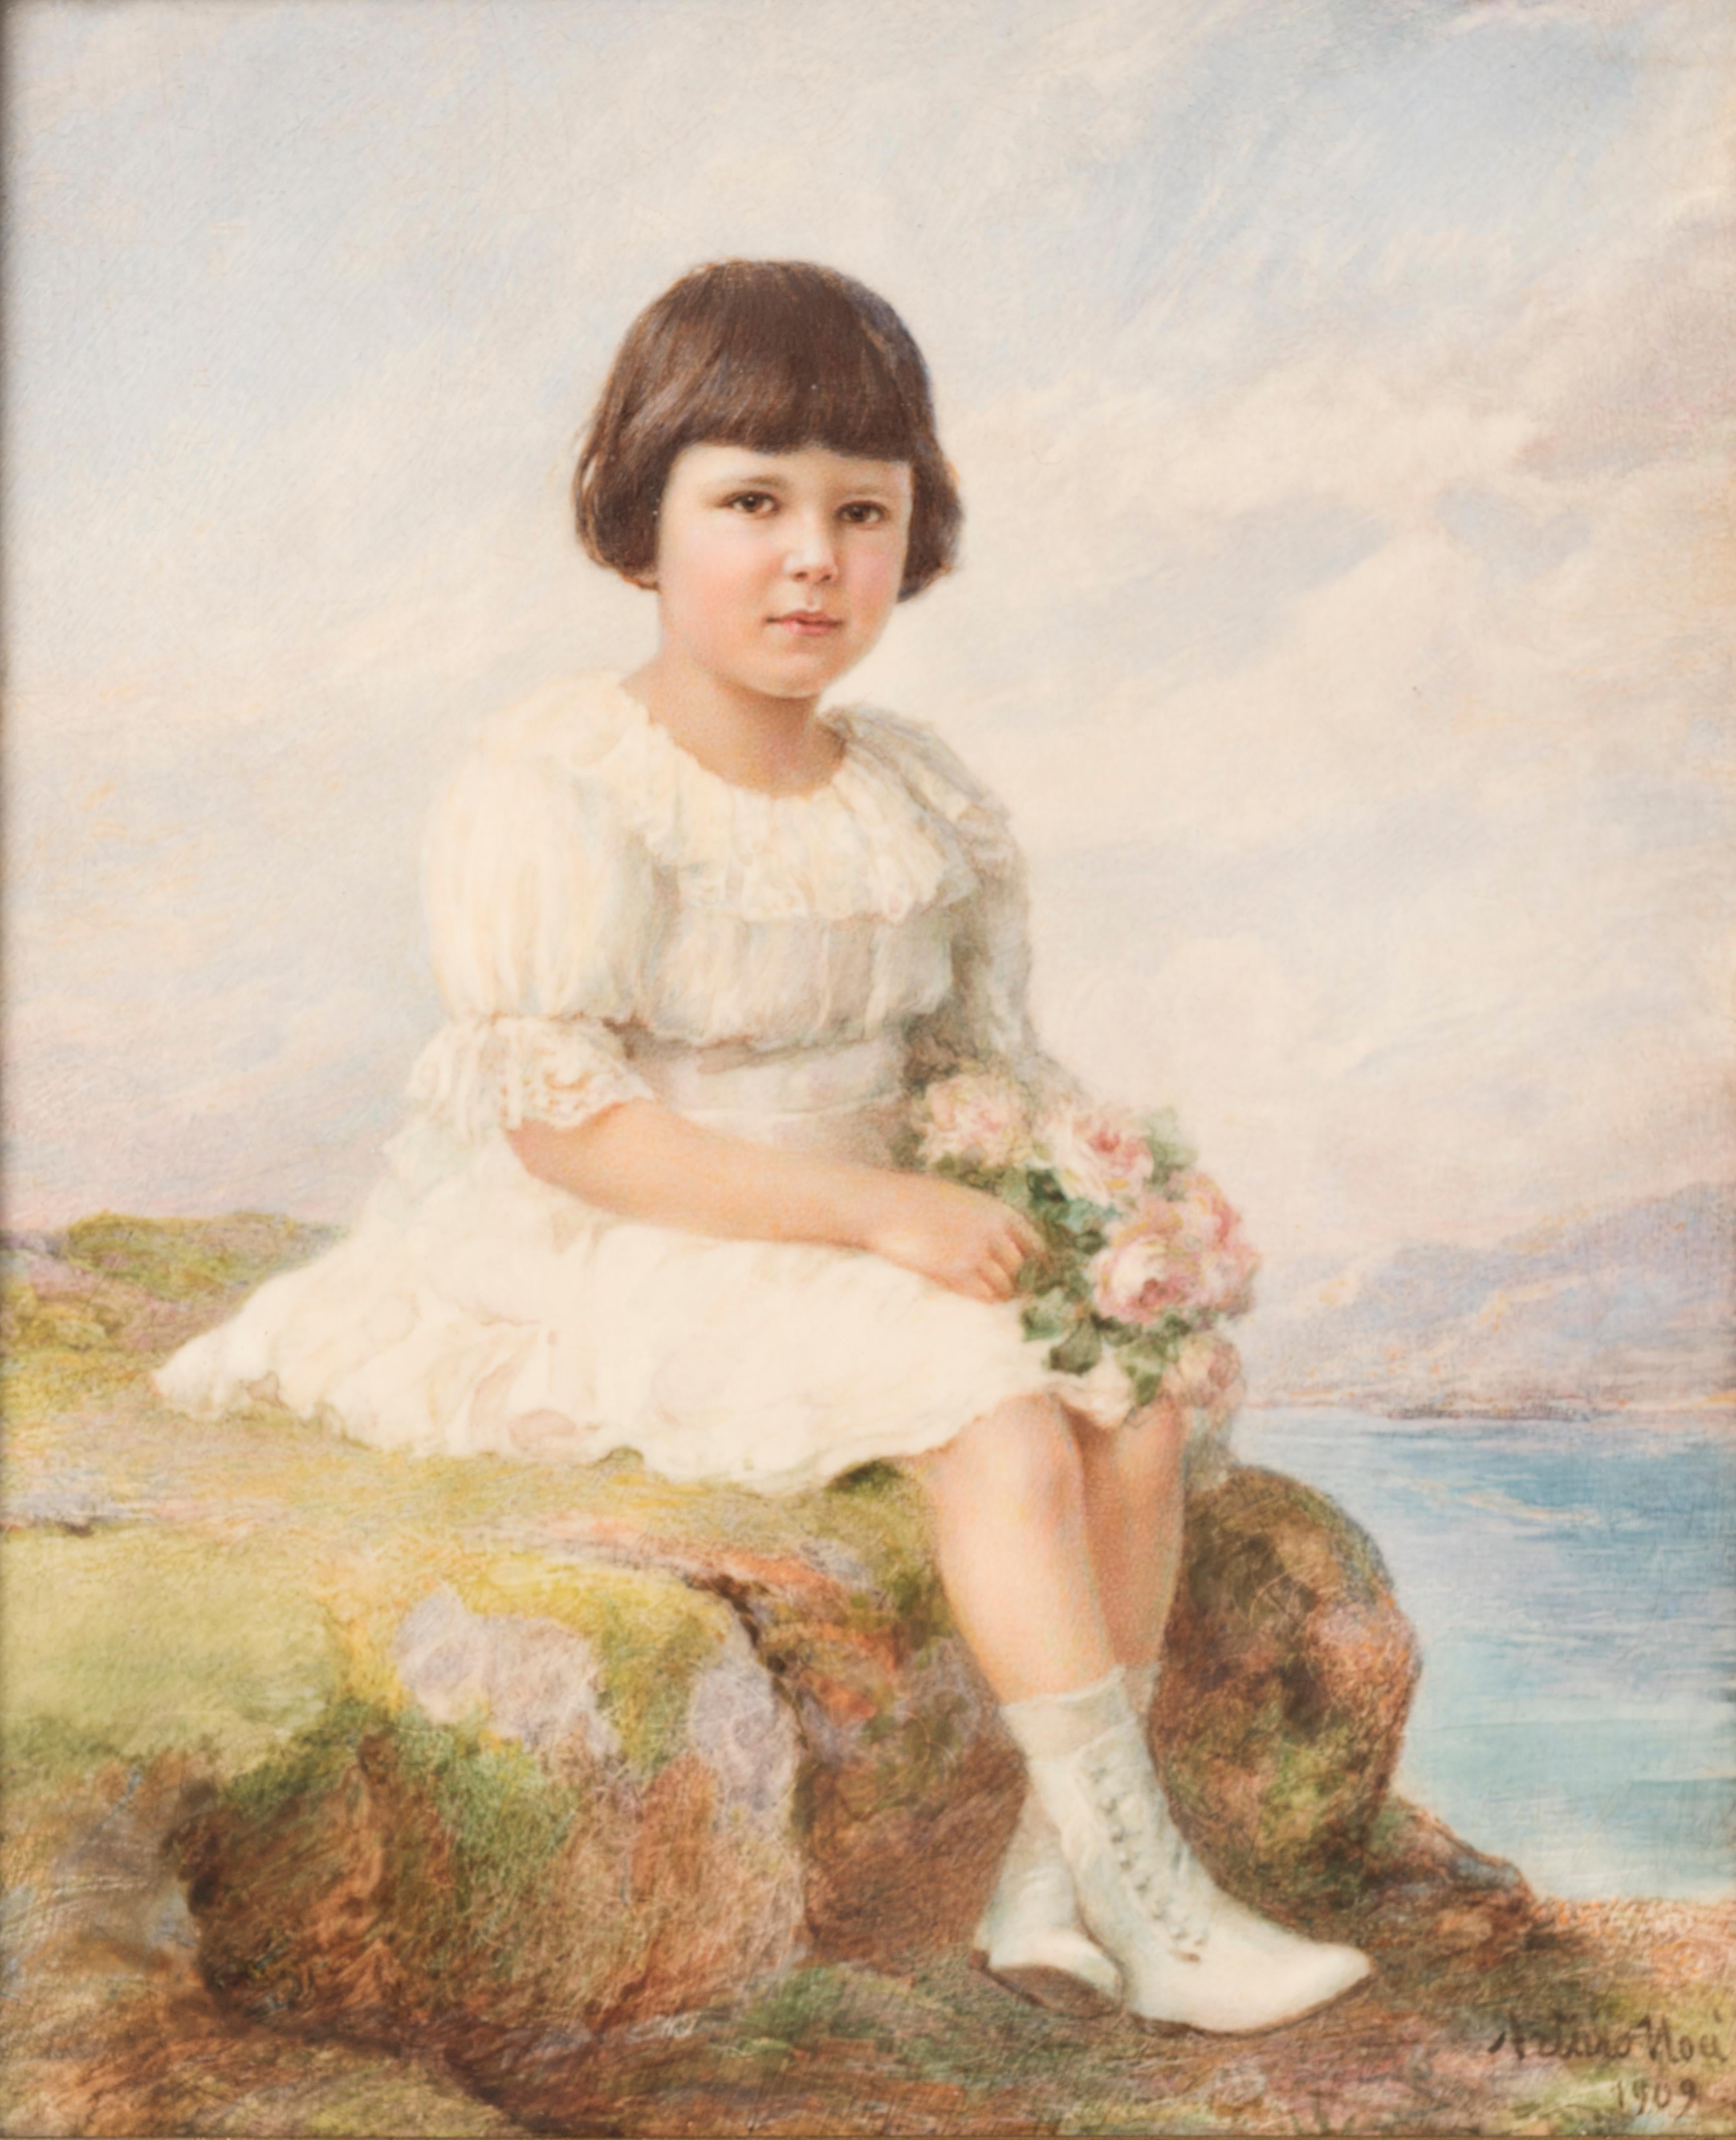 Arturo Noci Portrait Painting - Portrait of Child with Flowers in Hands - Original Miniature Painting by A. Noci